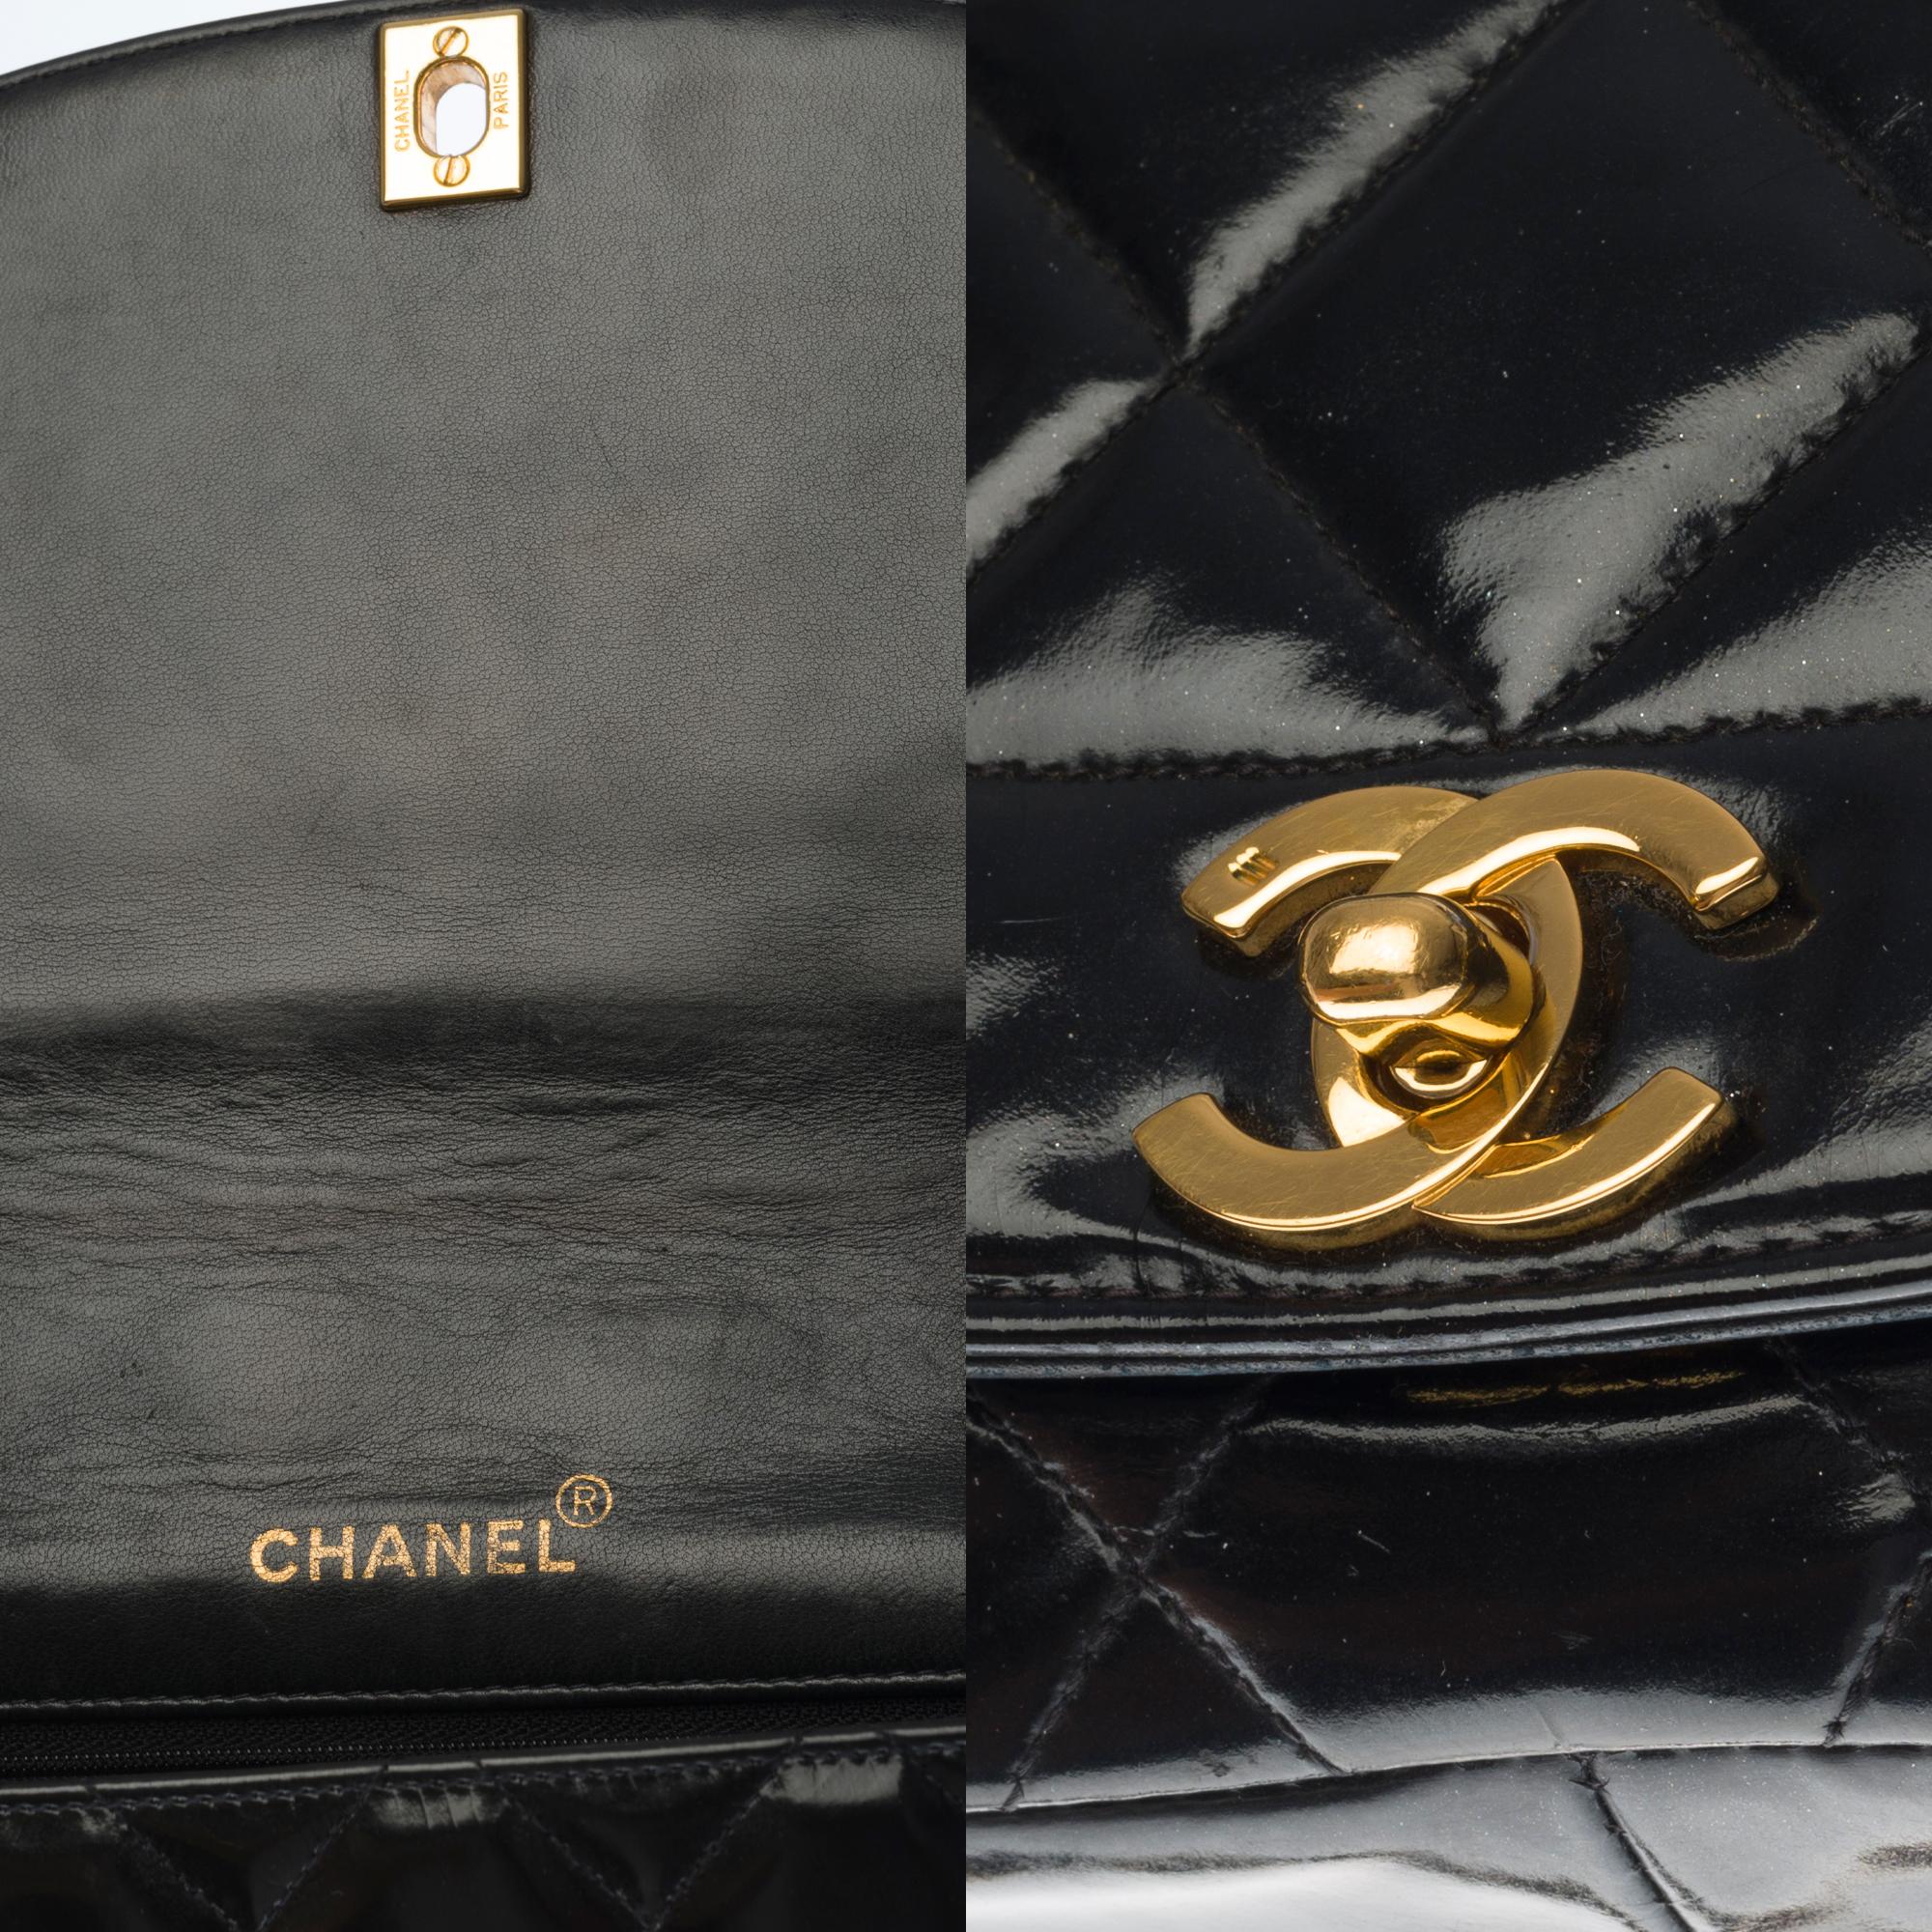 Stunning Chanel Diana Shoulder bag in black quilted patent leather and GHW 1